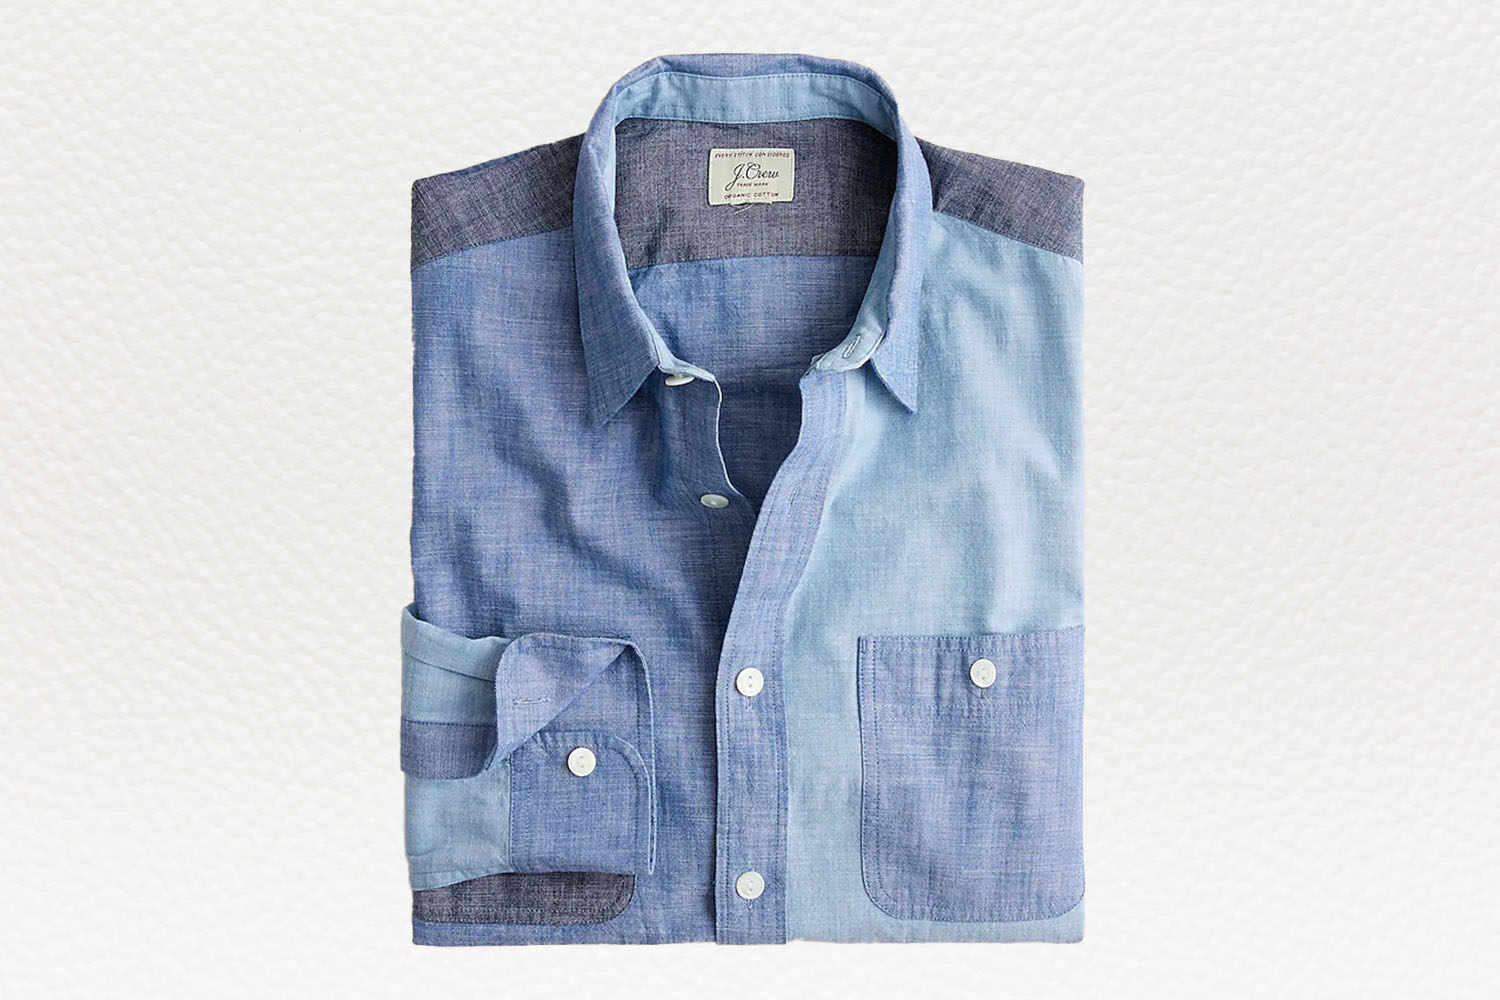 a blue mix and match chambray shirt from J.Crew on a white textured background